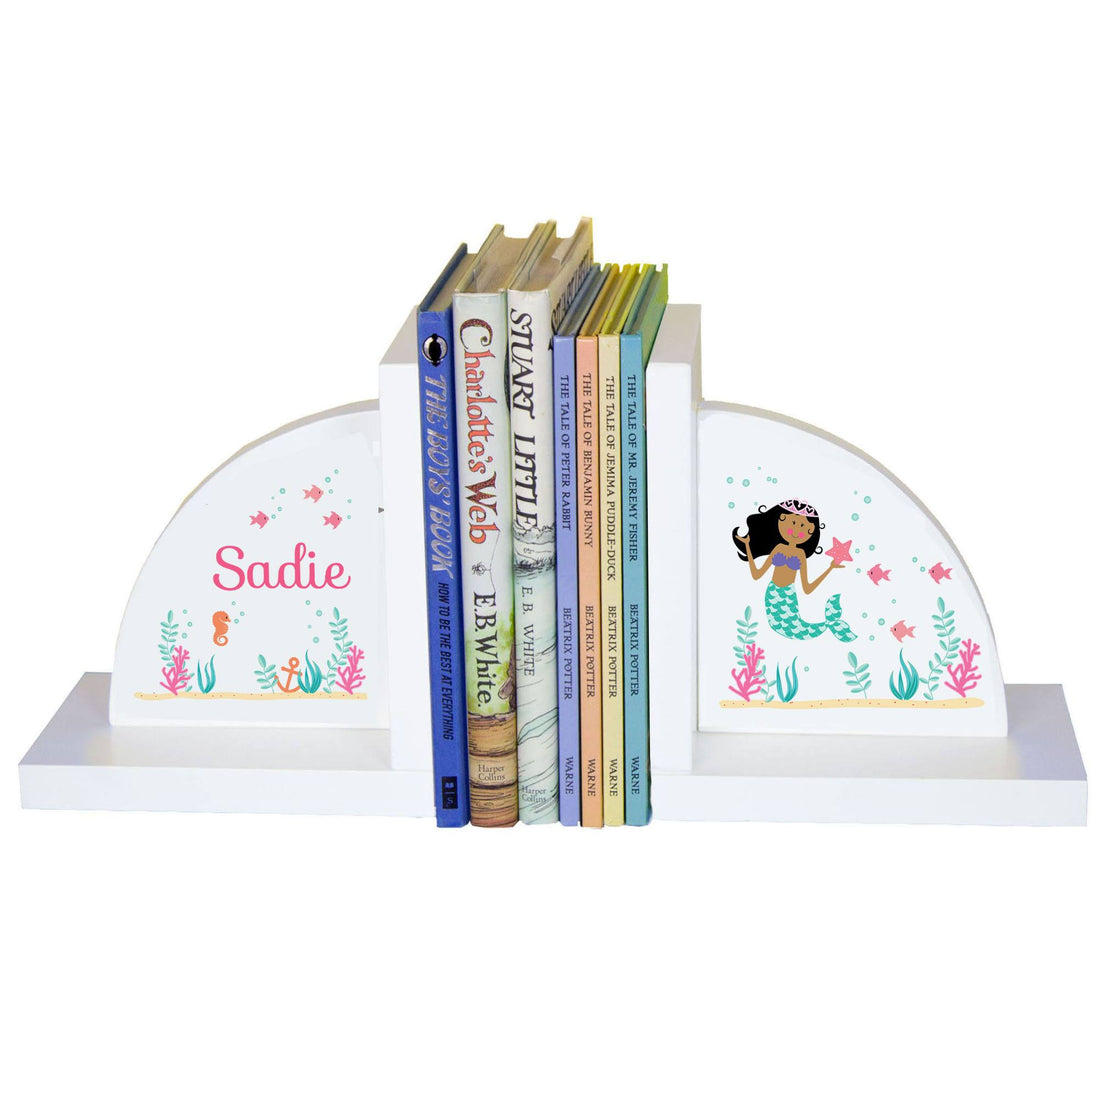 Personalized White Bookends with African American Mermaid Princess design